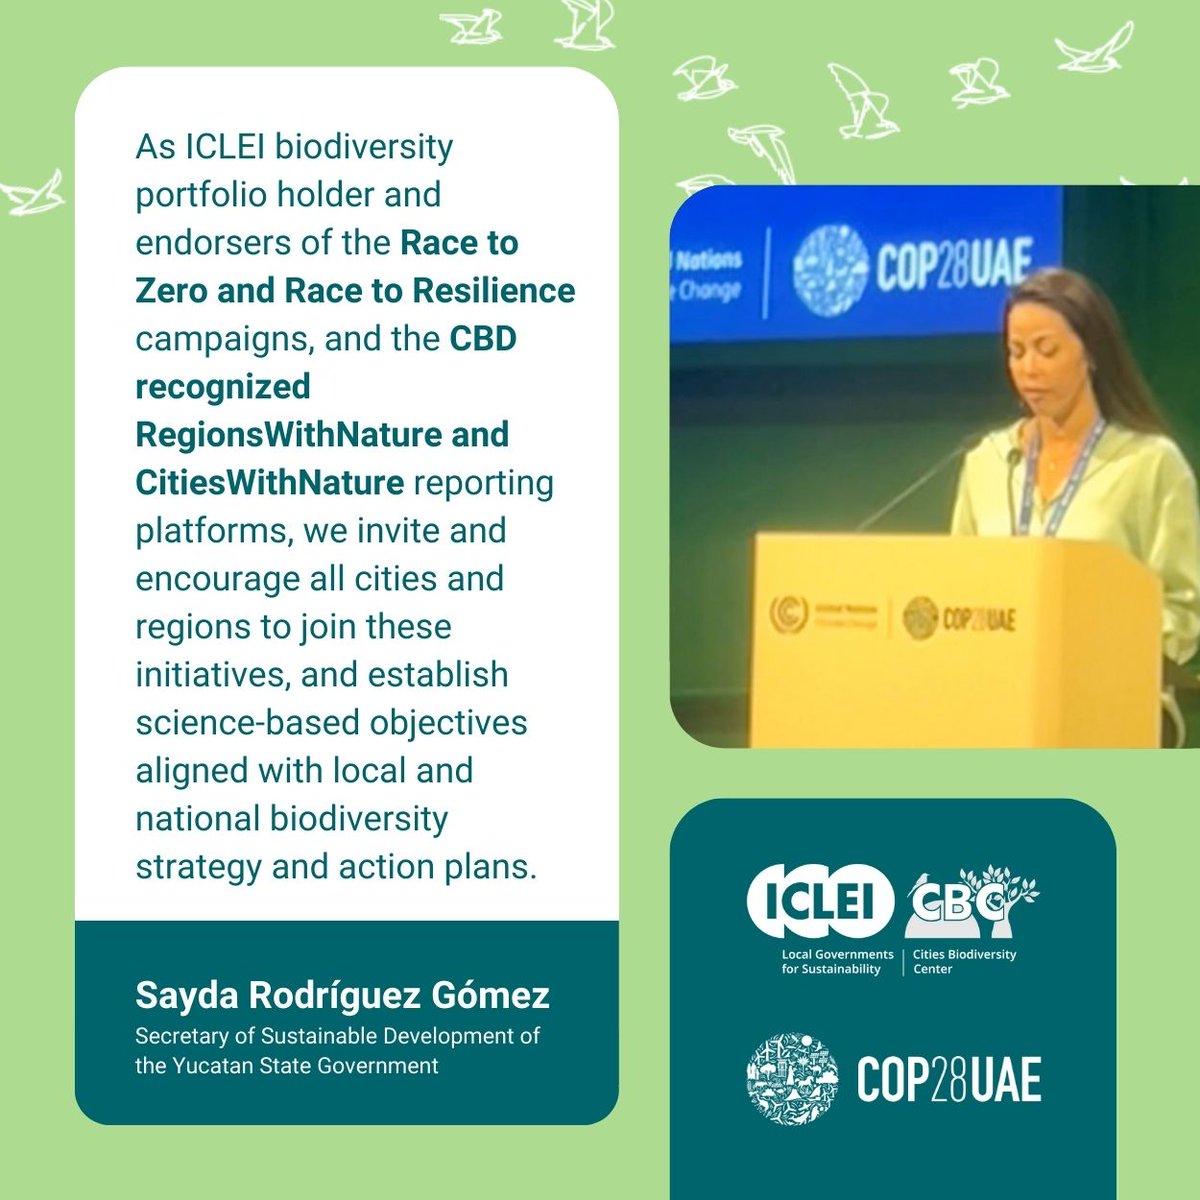 At our #COP28 session: Local Ecosystem Restoration for Nature-Positive Cities & Regions

Sayda Rodríguez Gómez, @gobiernoyucatan, as @ICLEI biodiversity portfolio holder, calls on cities & regions to join #RaceToZero, #RaceToResilience, #CitiesWithNature & #RegionsWithNature 🌱🏙